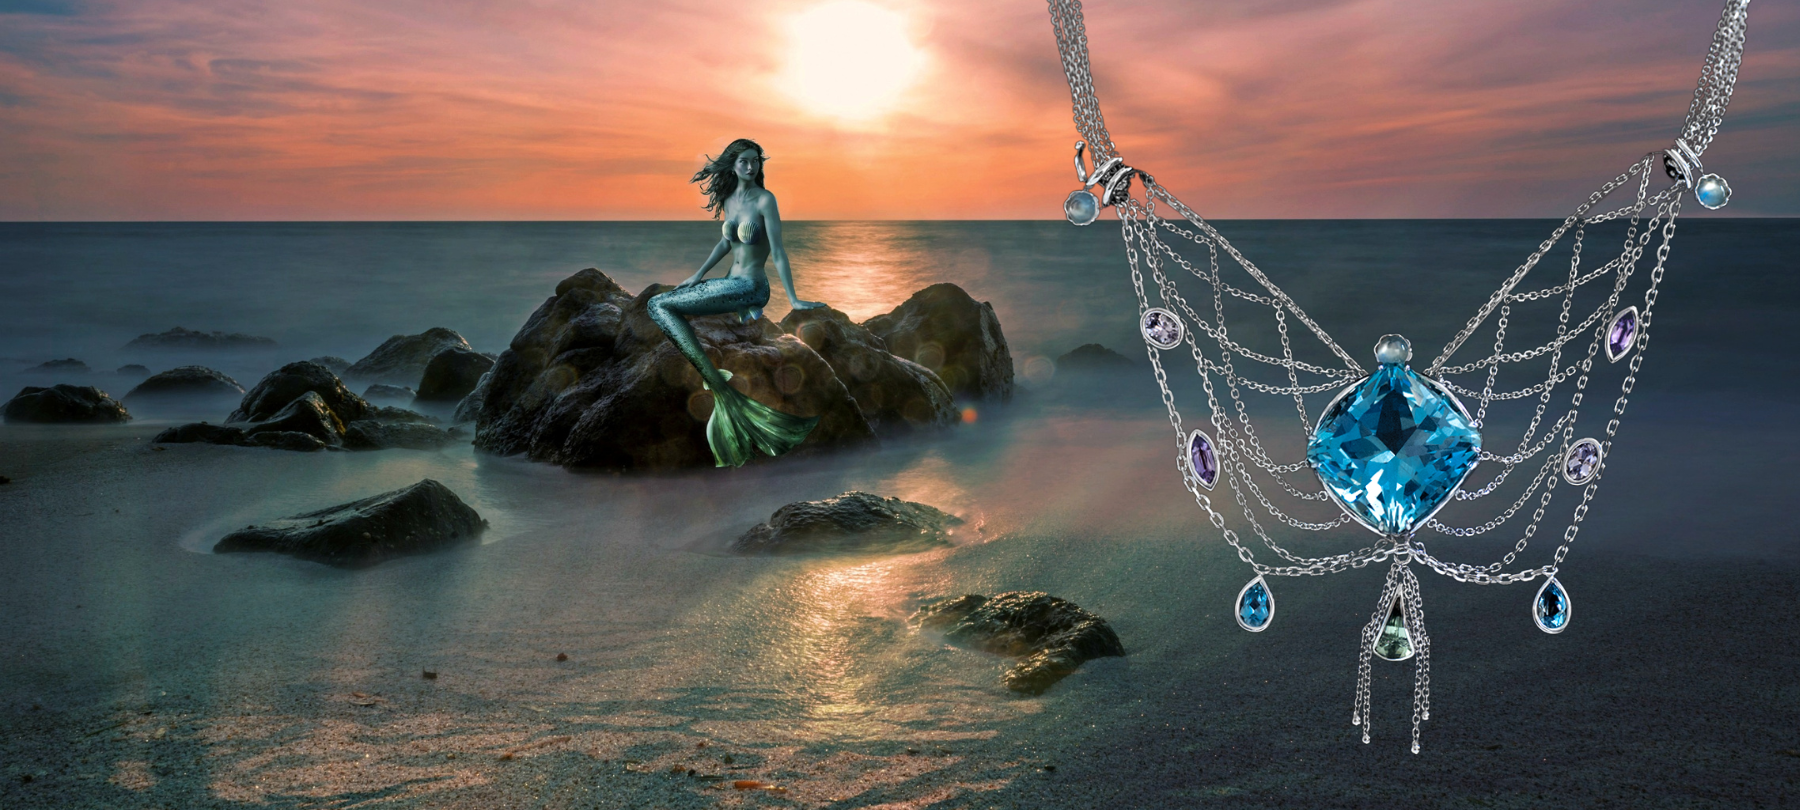 White gold necklace with 30.39 carat Aquamarine, accented by 1.25 carats of moonstone, 1.11 carats tourmaline, 0.51 carats aquamarine, 0.65 carats purple sapphire, 0.73 carats of lavender spinel overlaid an image of mermaid on the rocky shore at sunset overlooking calm sea